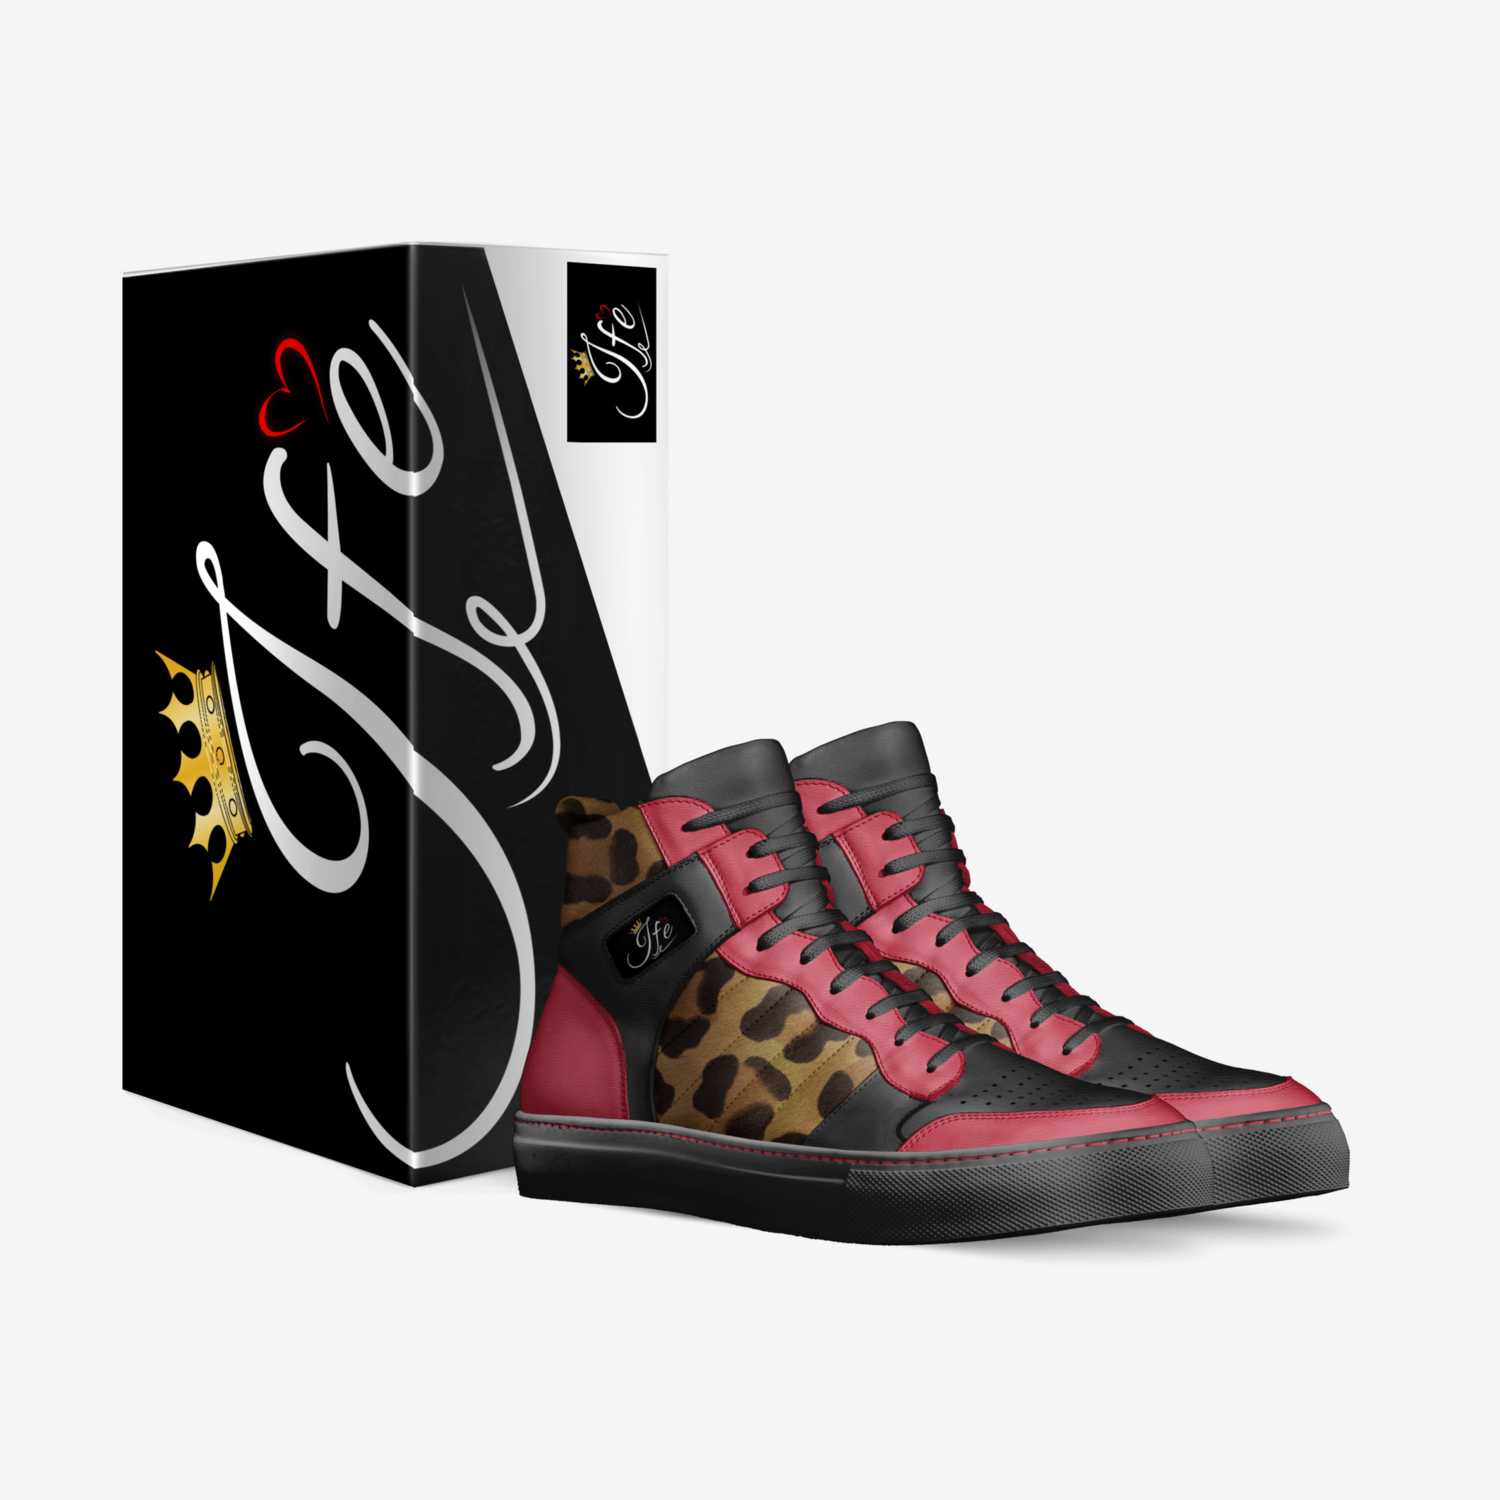 IFE custom made in Italy shoes by Team Ife | Box view